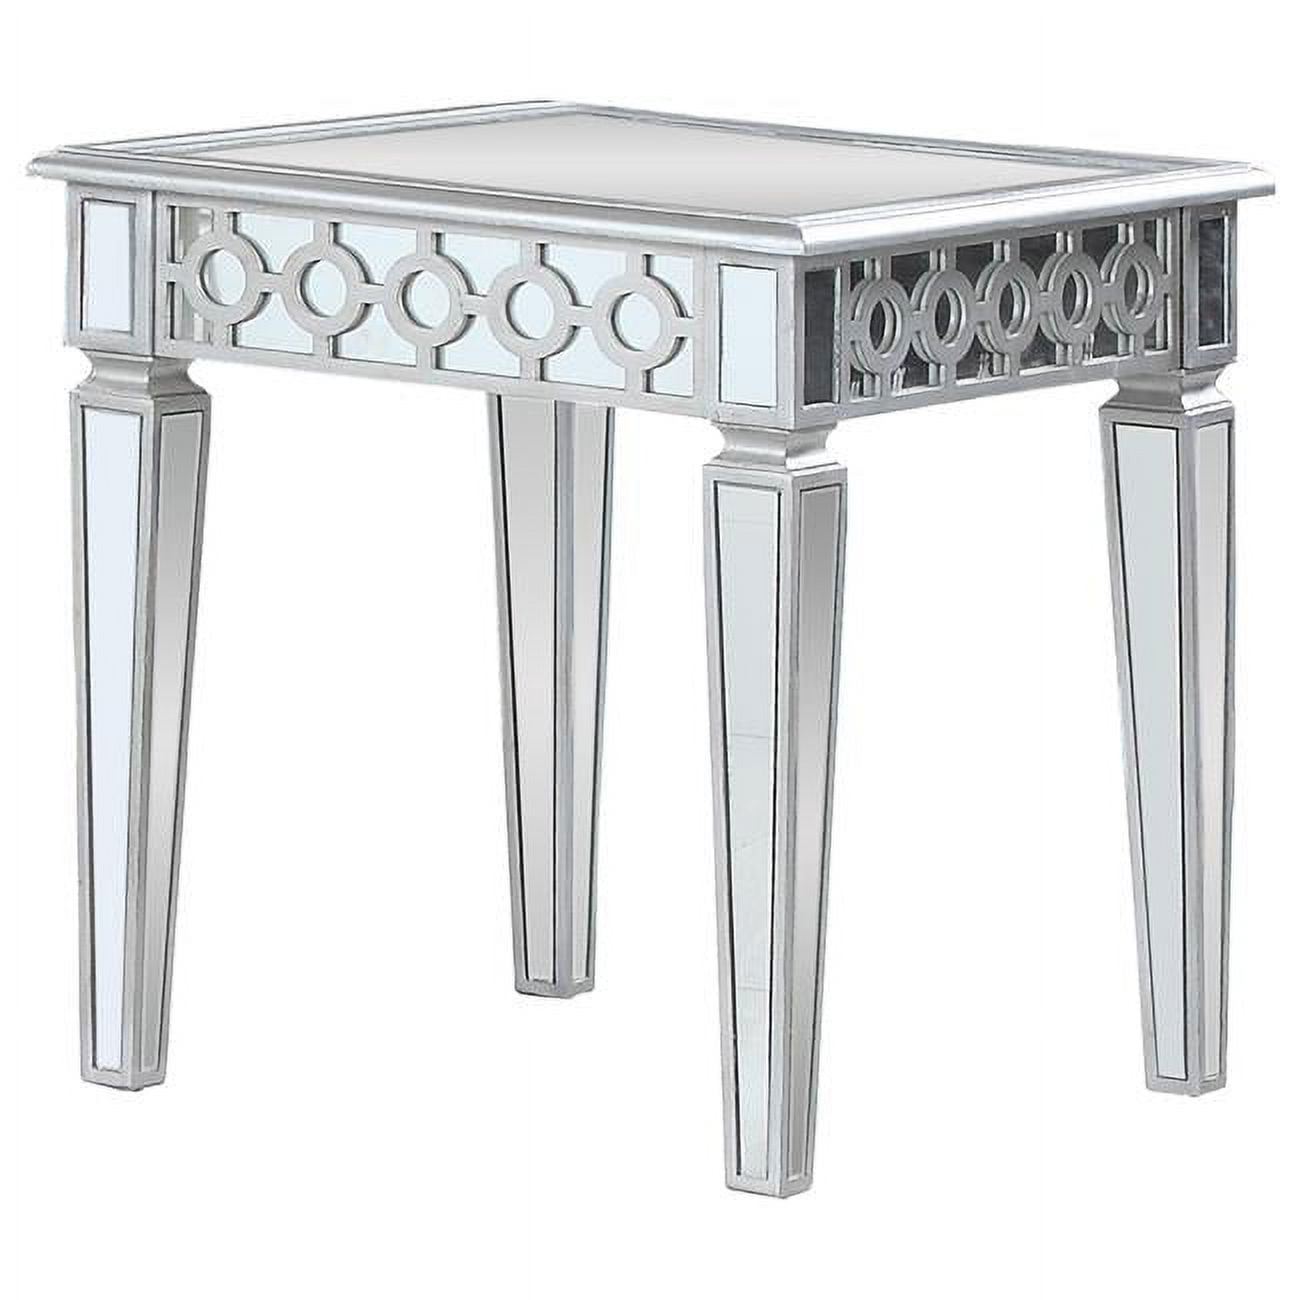 Picture of Best Master Furniture T1840 End Table Sophie Silver Mirrored End Table